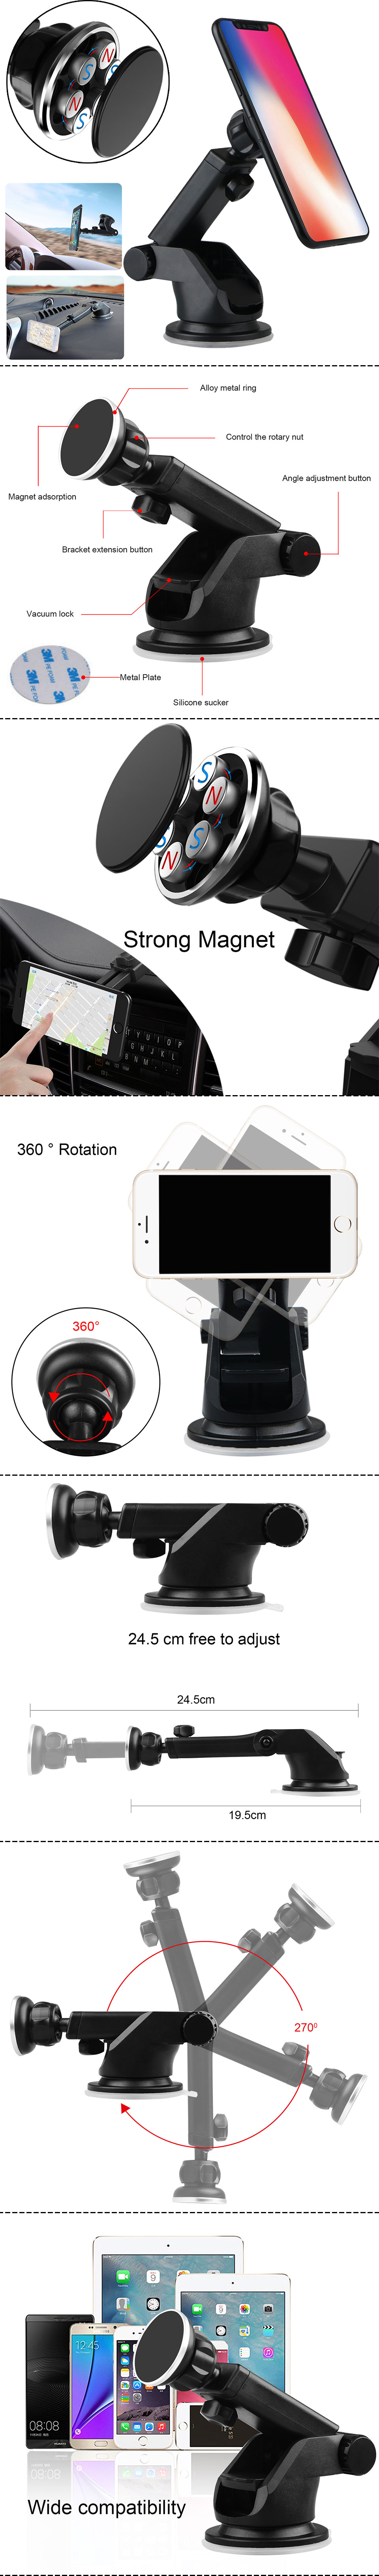 Magnetic Car Mount Holder Windshield Dashboard Suction Mount For Cell Phone GPS